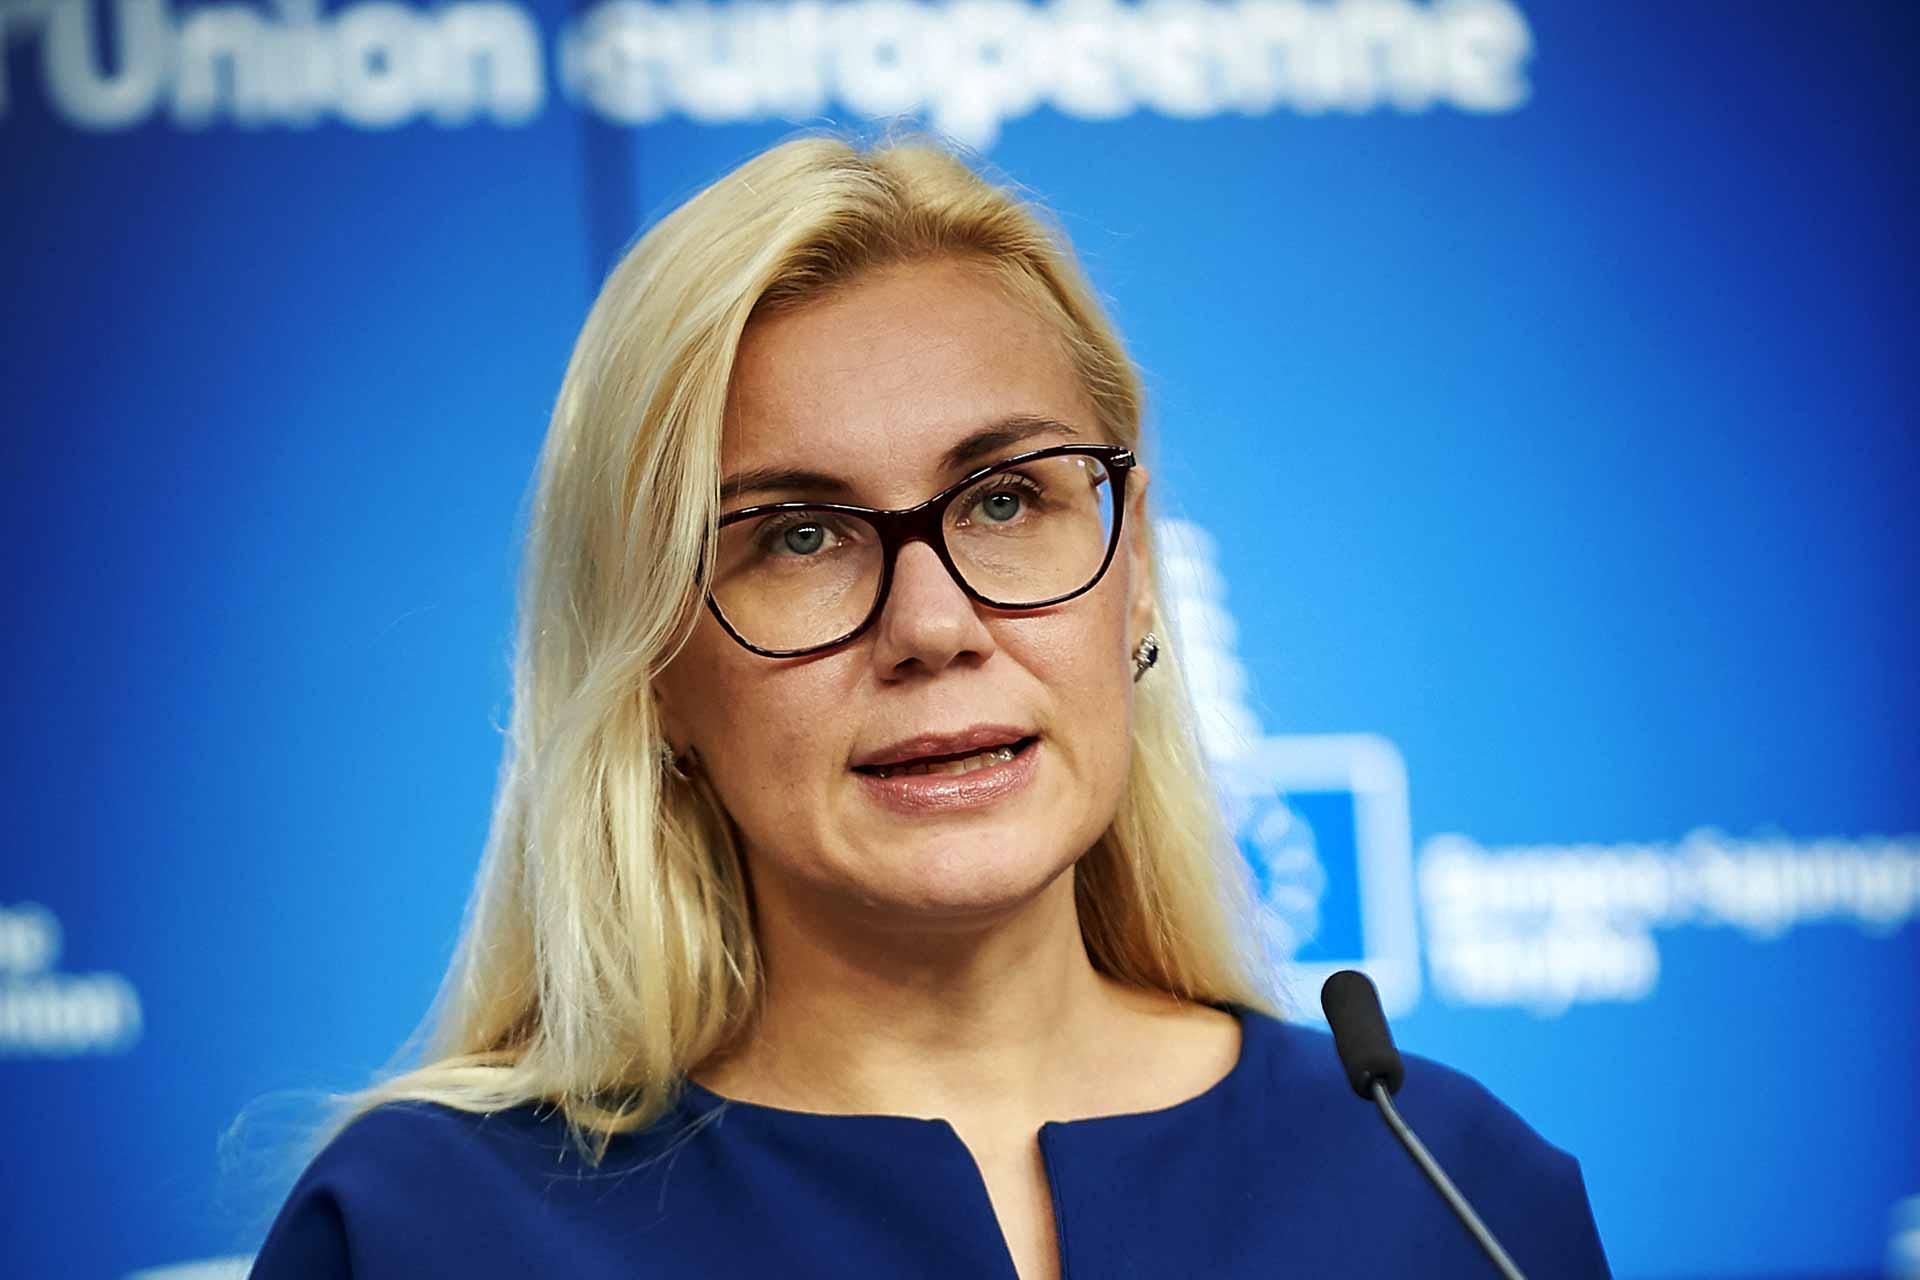 Southern Gas Corridor proved to be crucial source of piped gas supply for Europe – Kadri Simson